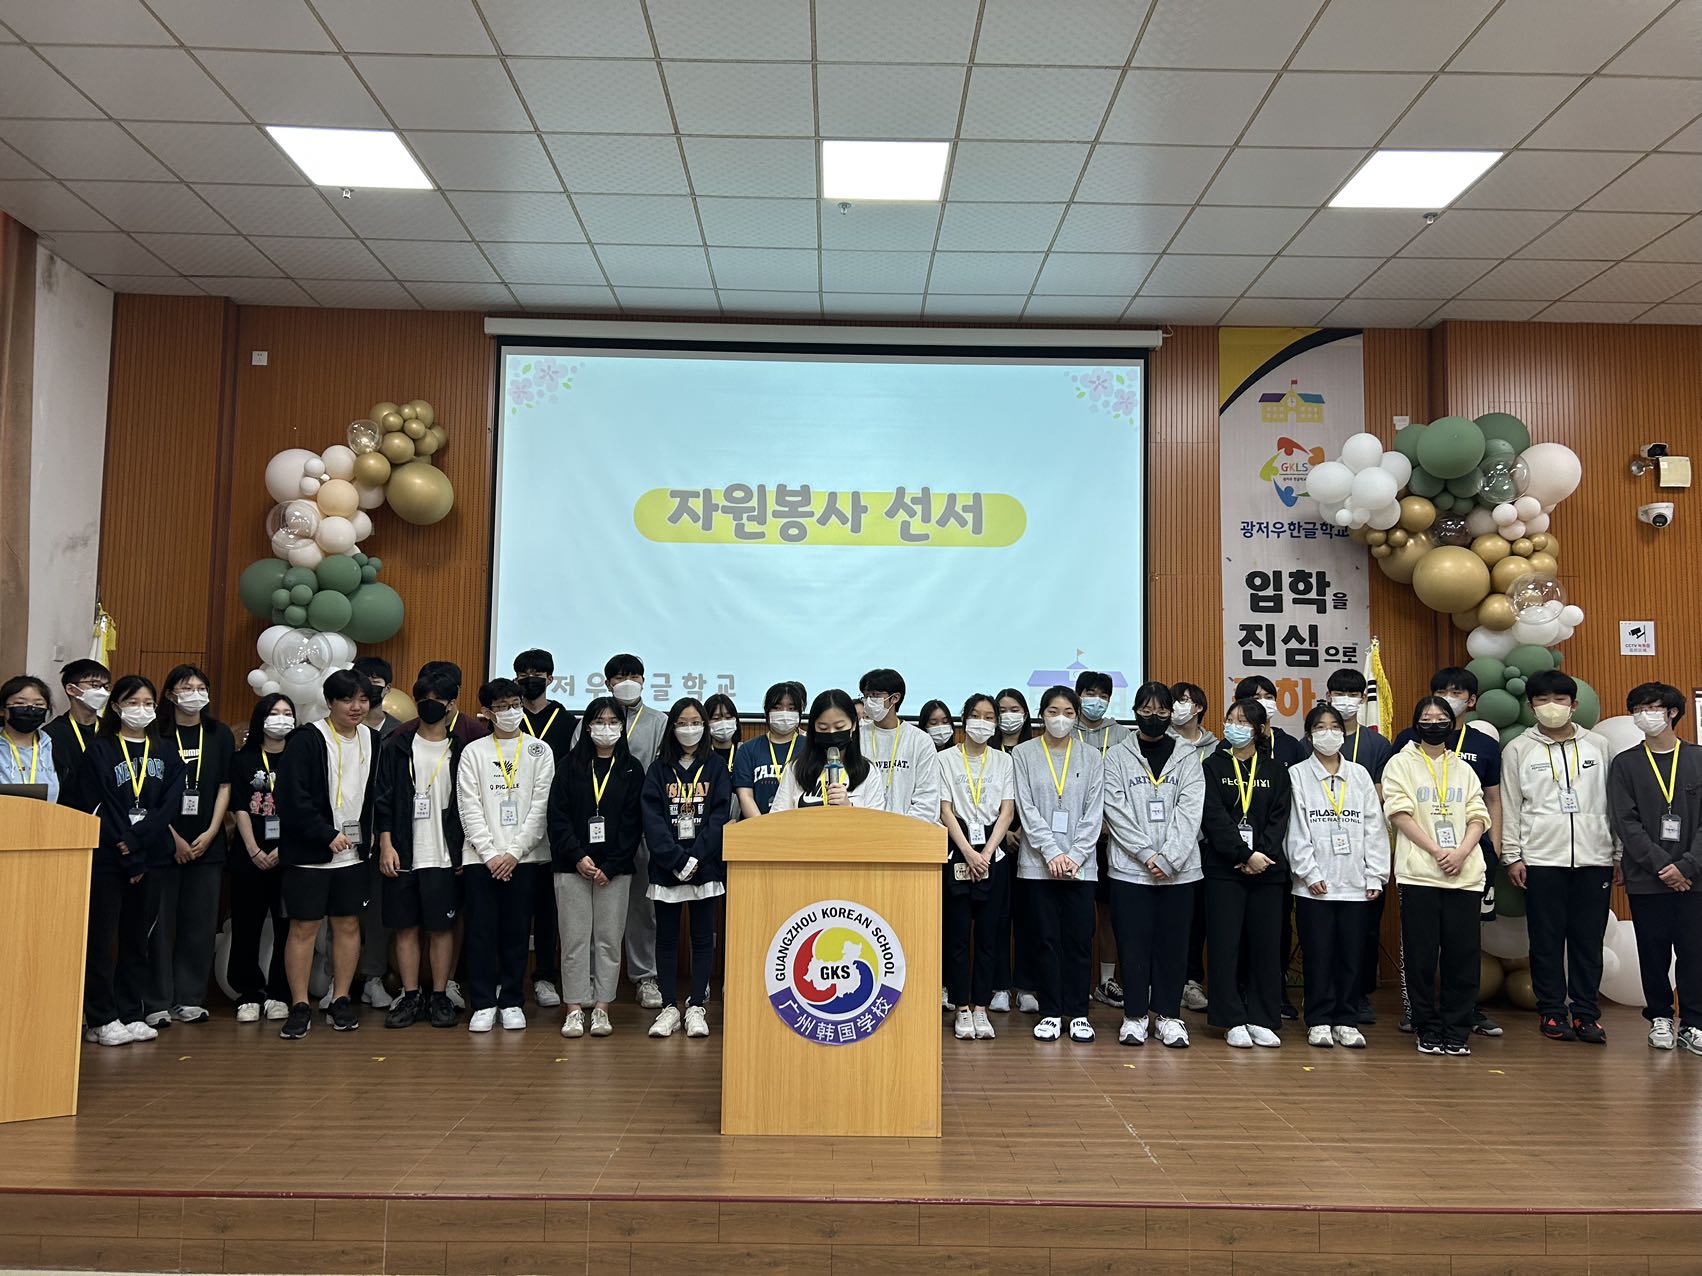 Youth volunteers of the Hangeul School in Guangzhou pose for a ceremonial group photo